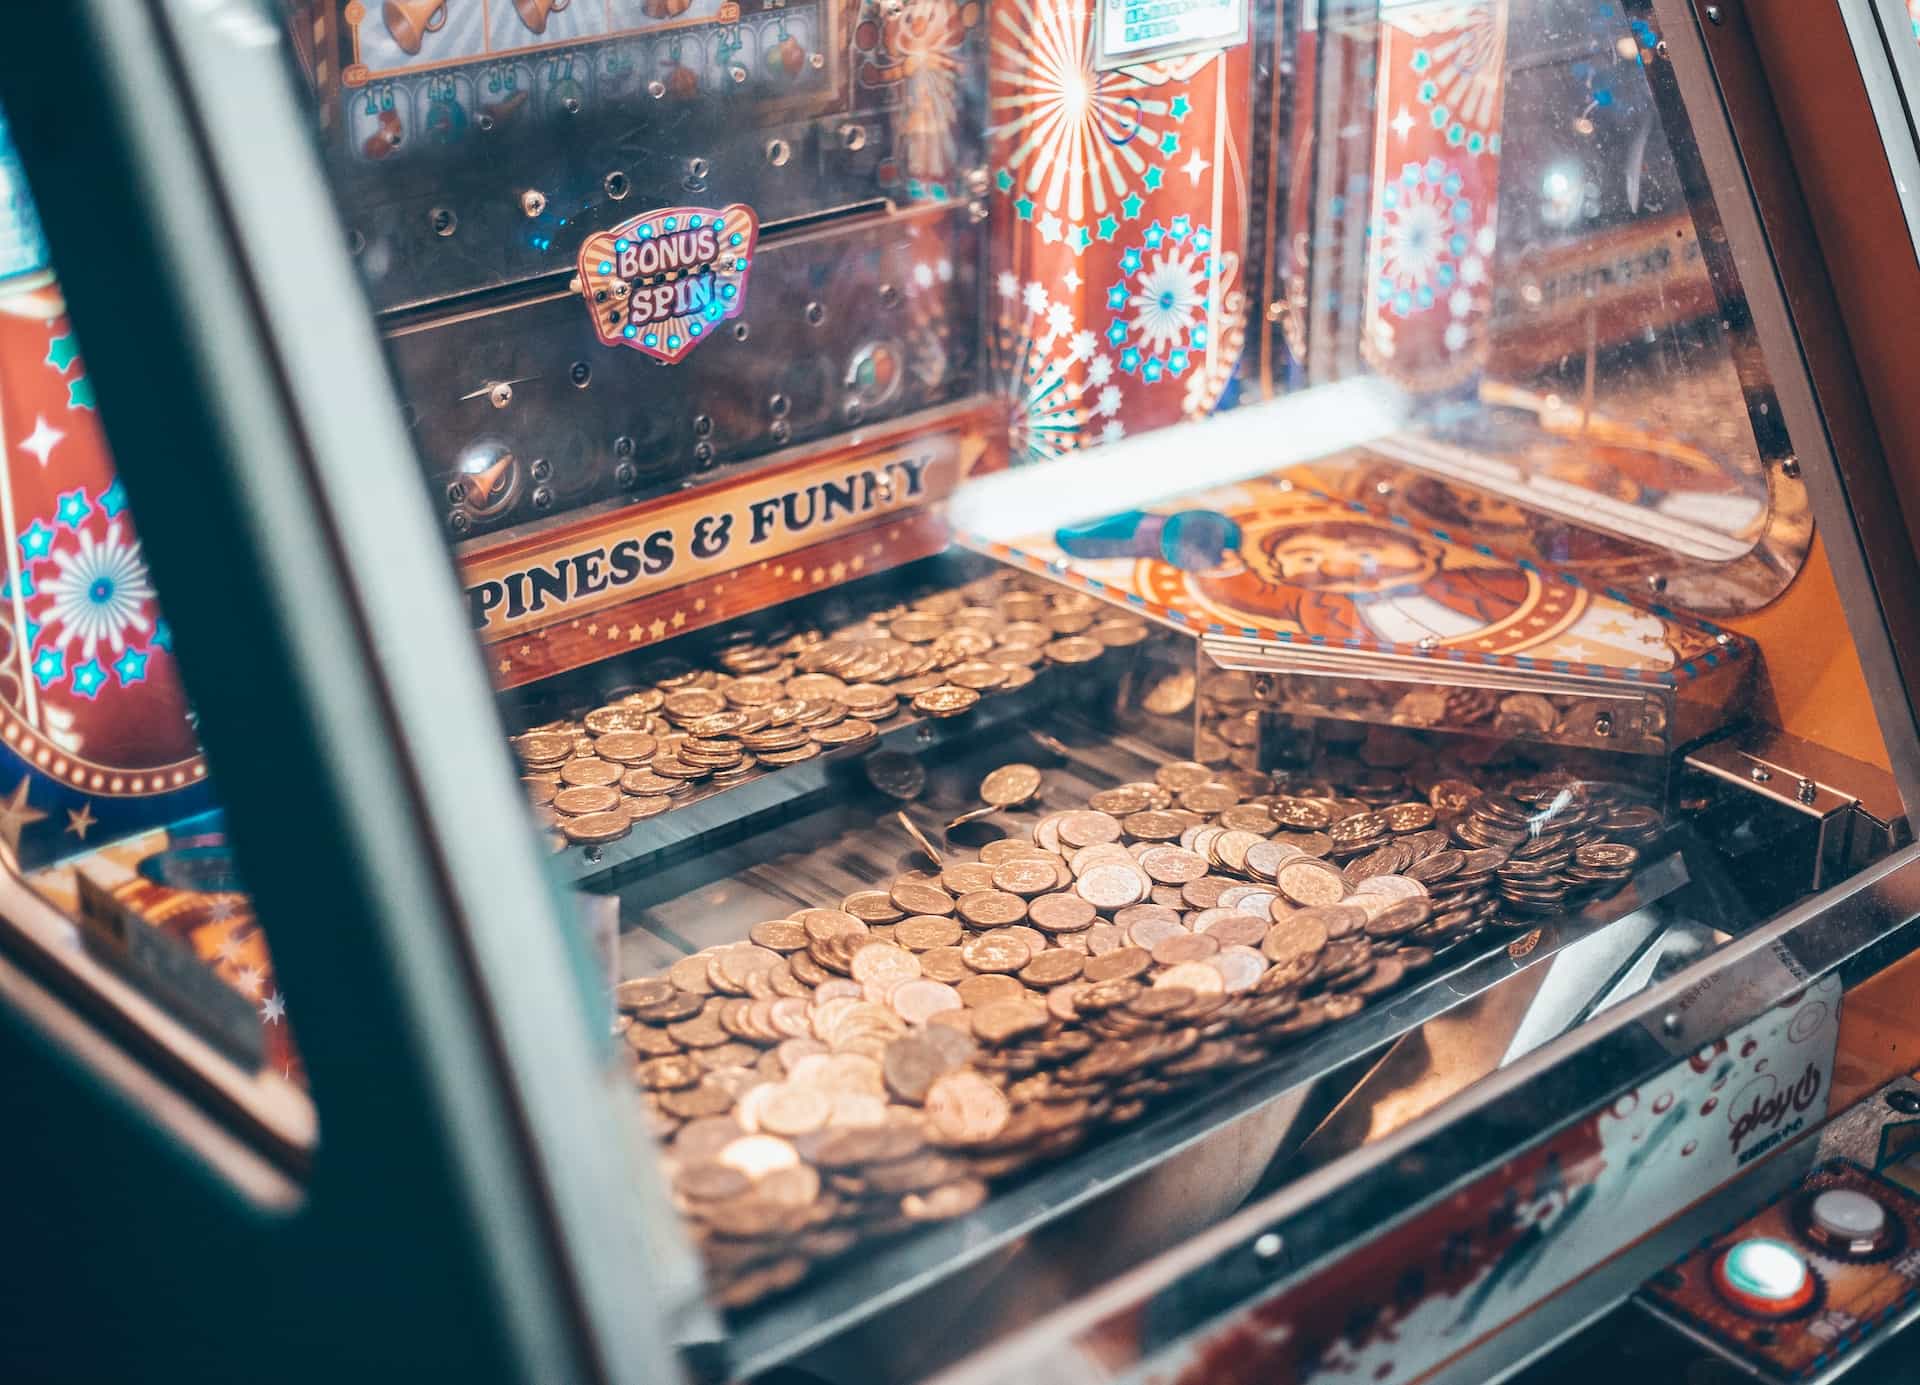 An arcade machine filled with coins.